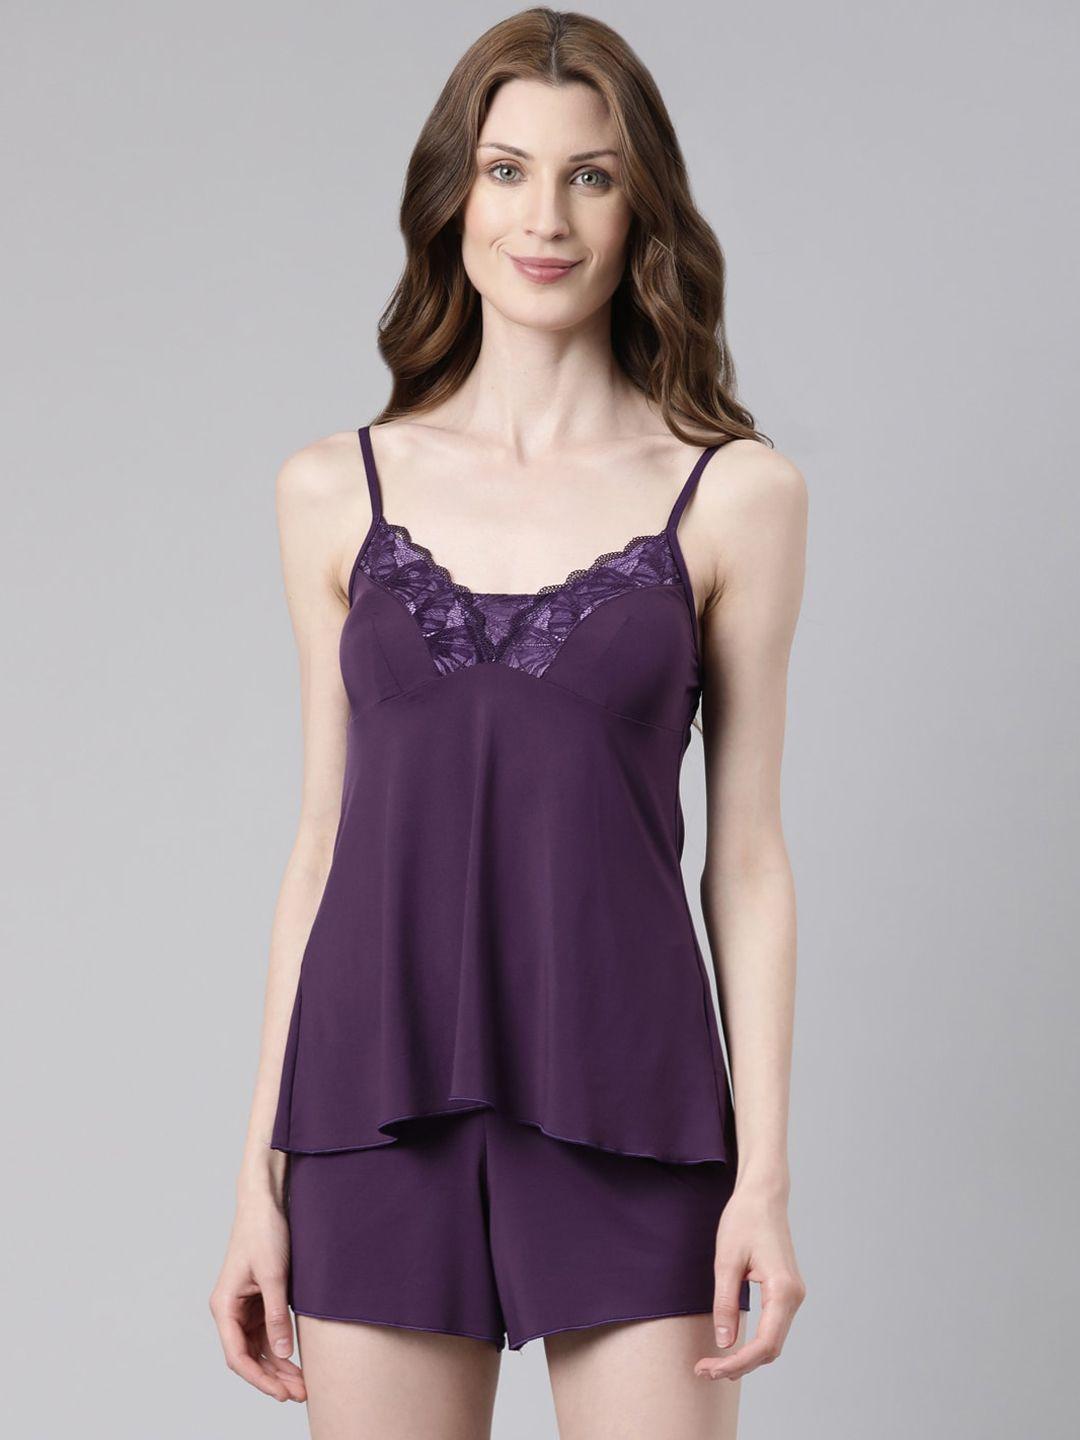 Enamor Lace Detail Camisole Top and Shorts Set